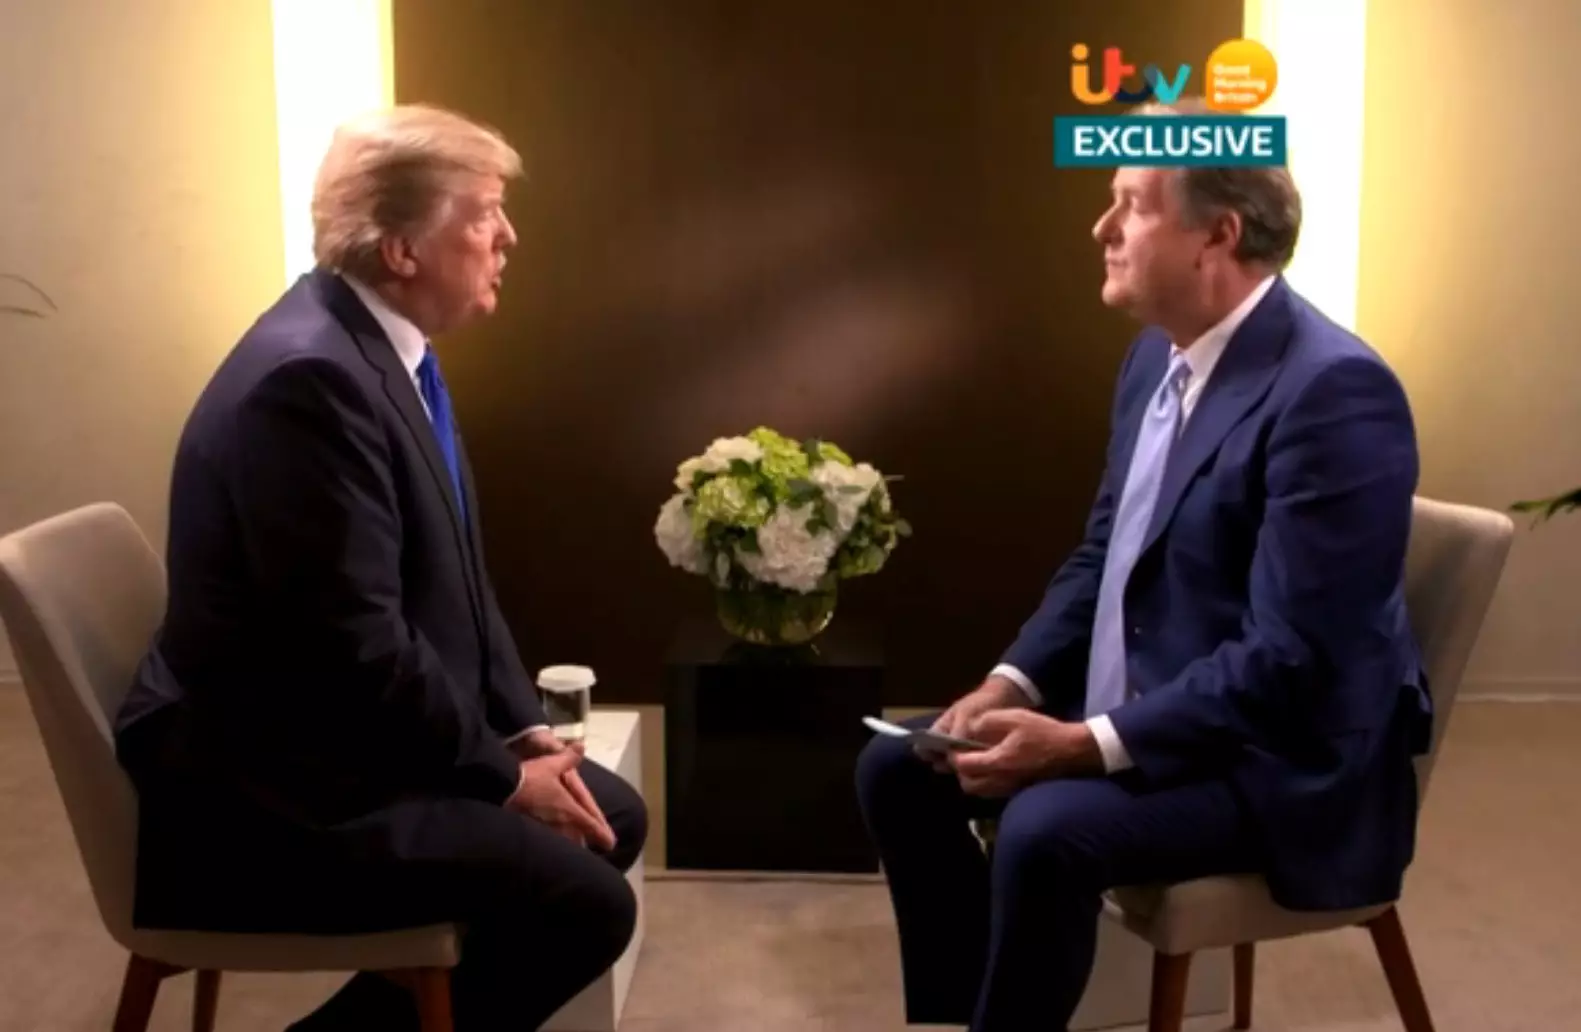 An interview with Donald Trump.